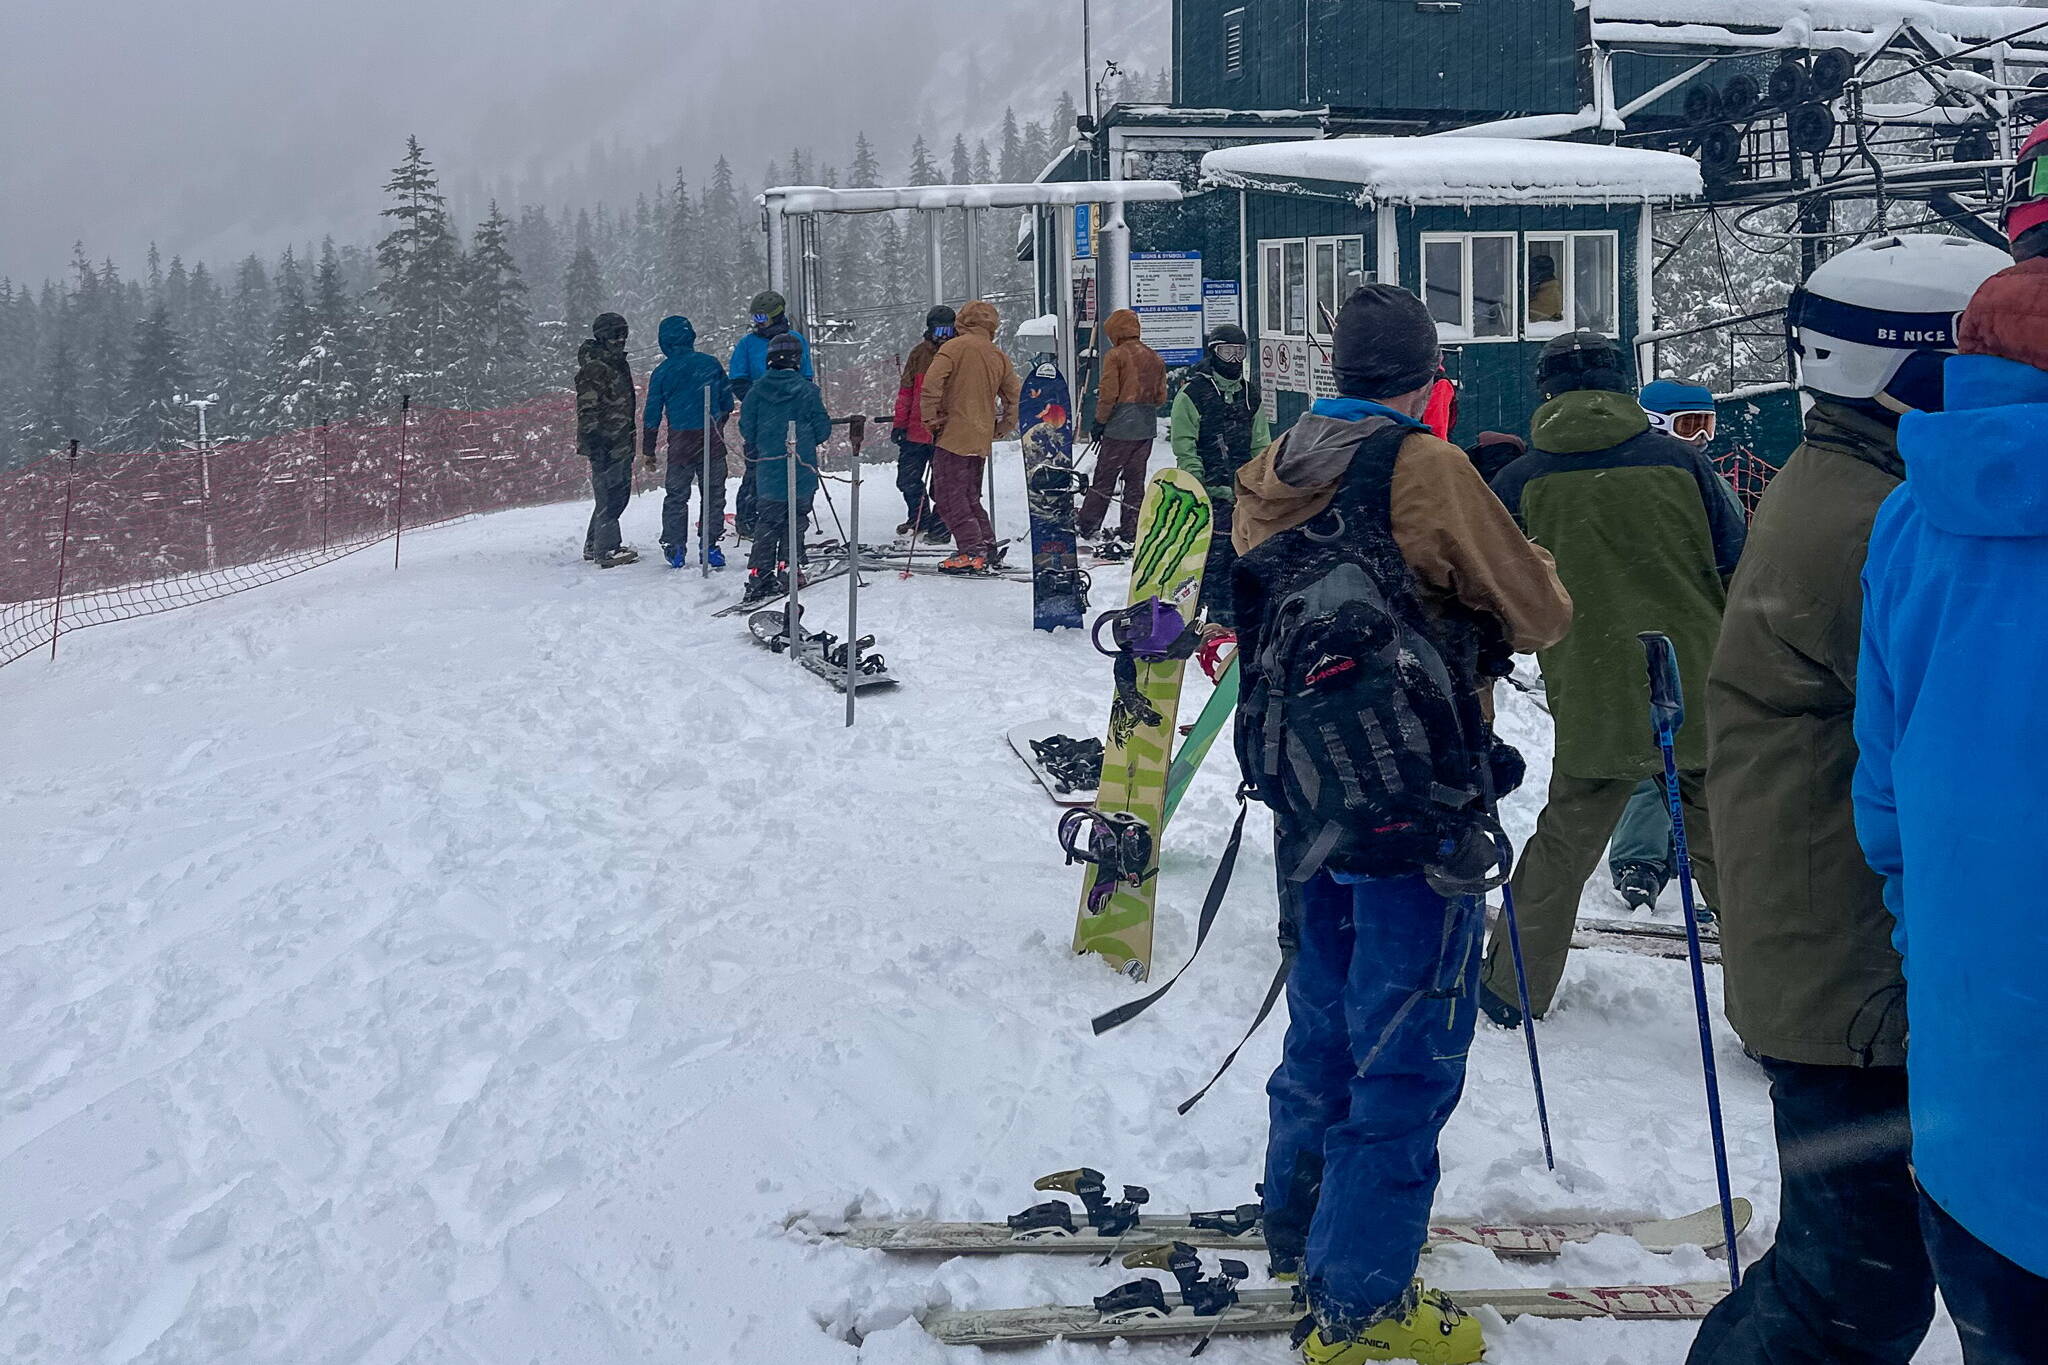 People line up at the Ptarmigan lift on Sunday morning in the hope Eaglecrest Ski Area would begin limited operations during the day, but high winds prevented the lift from opening. The ski area is scheduled to begin its daily holiday schedule on Wednesday. (Photo courtesy of Eaglecrest Ski Area)